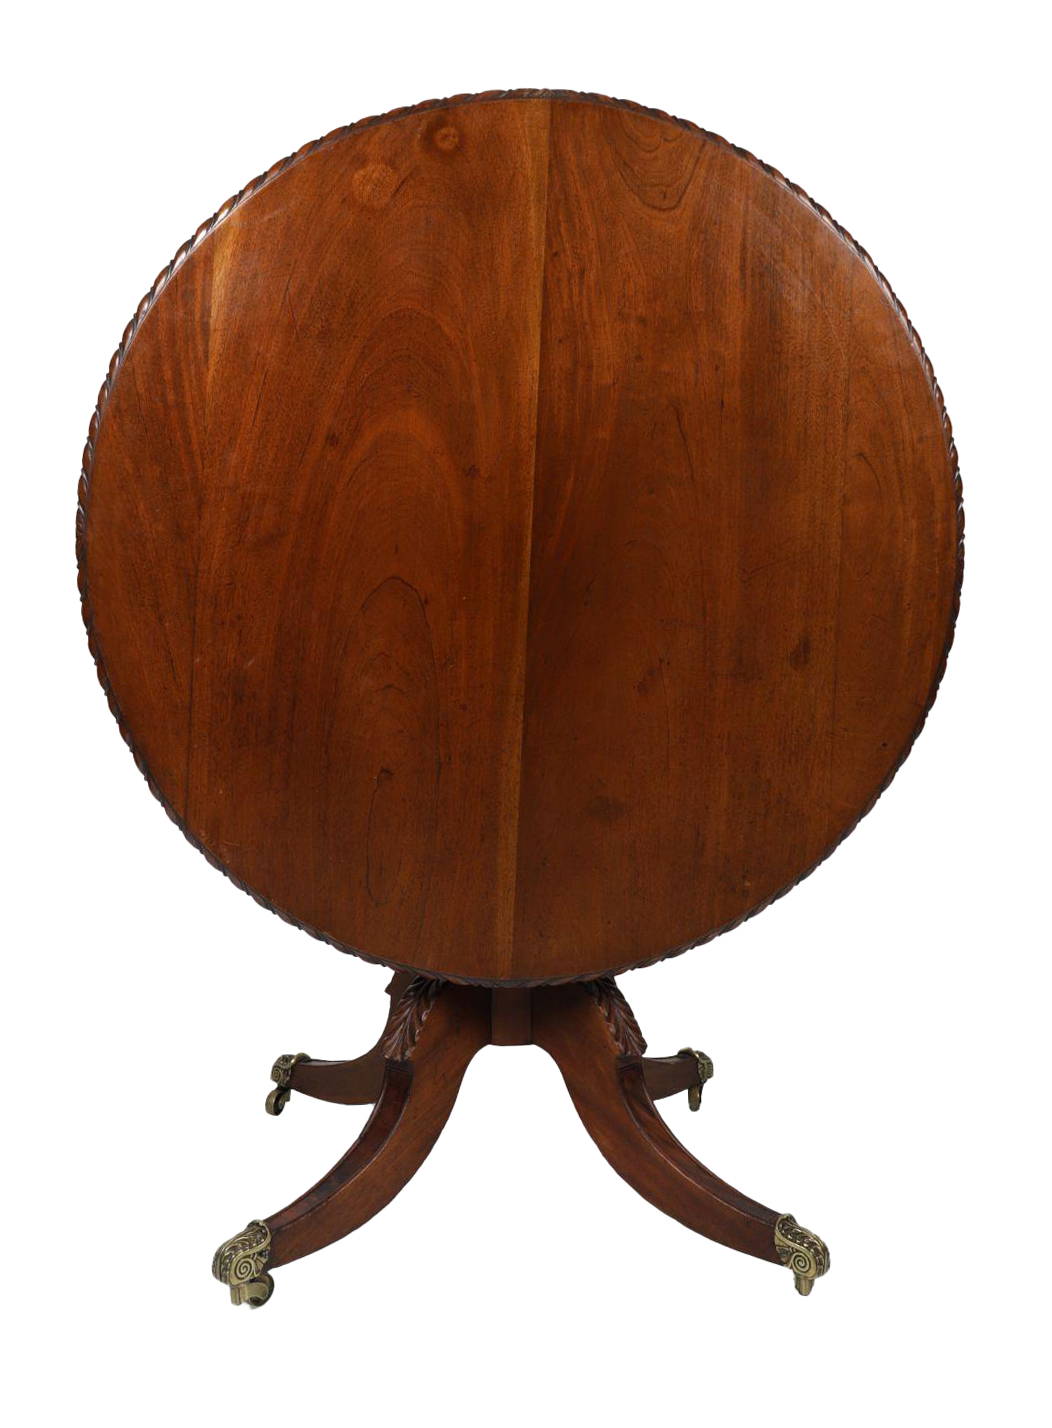 IRISH REGENCY MAHOGANY CENTRE TABLE IN THE MANNER OF MACK WILLIAMS AND GIBTON - Image 4 of 4